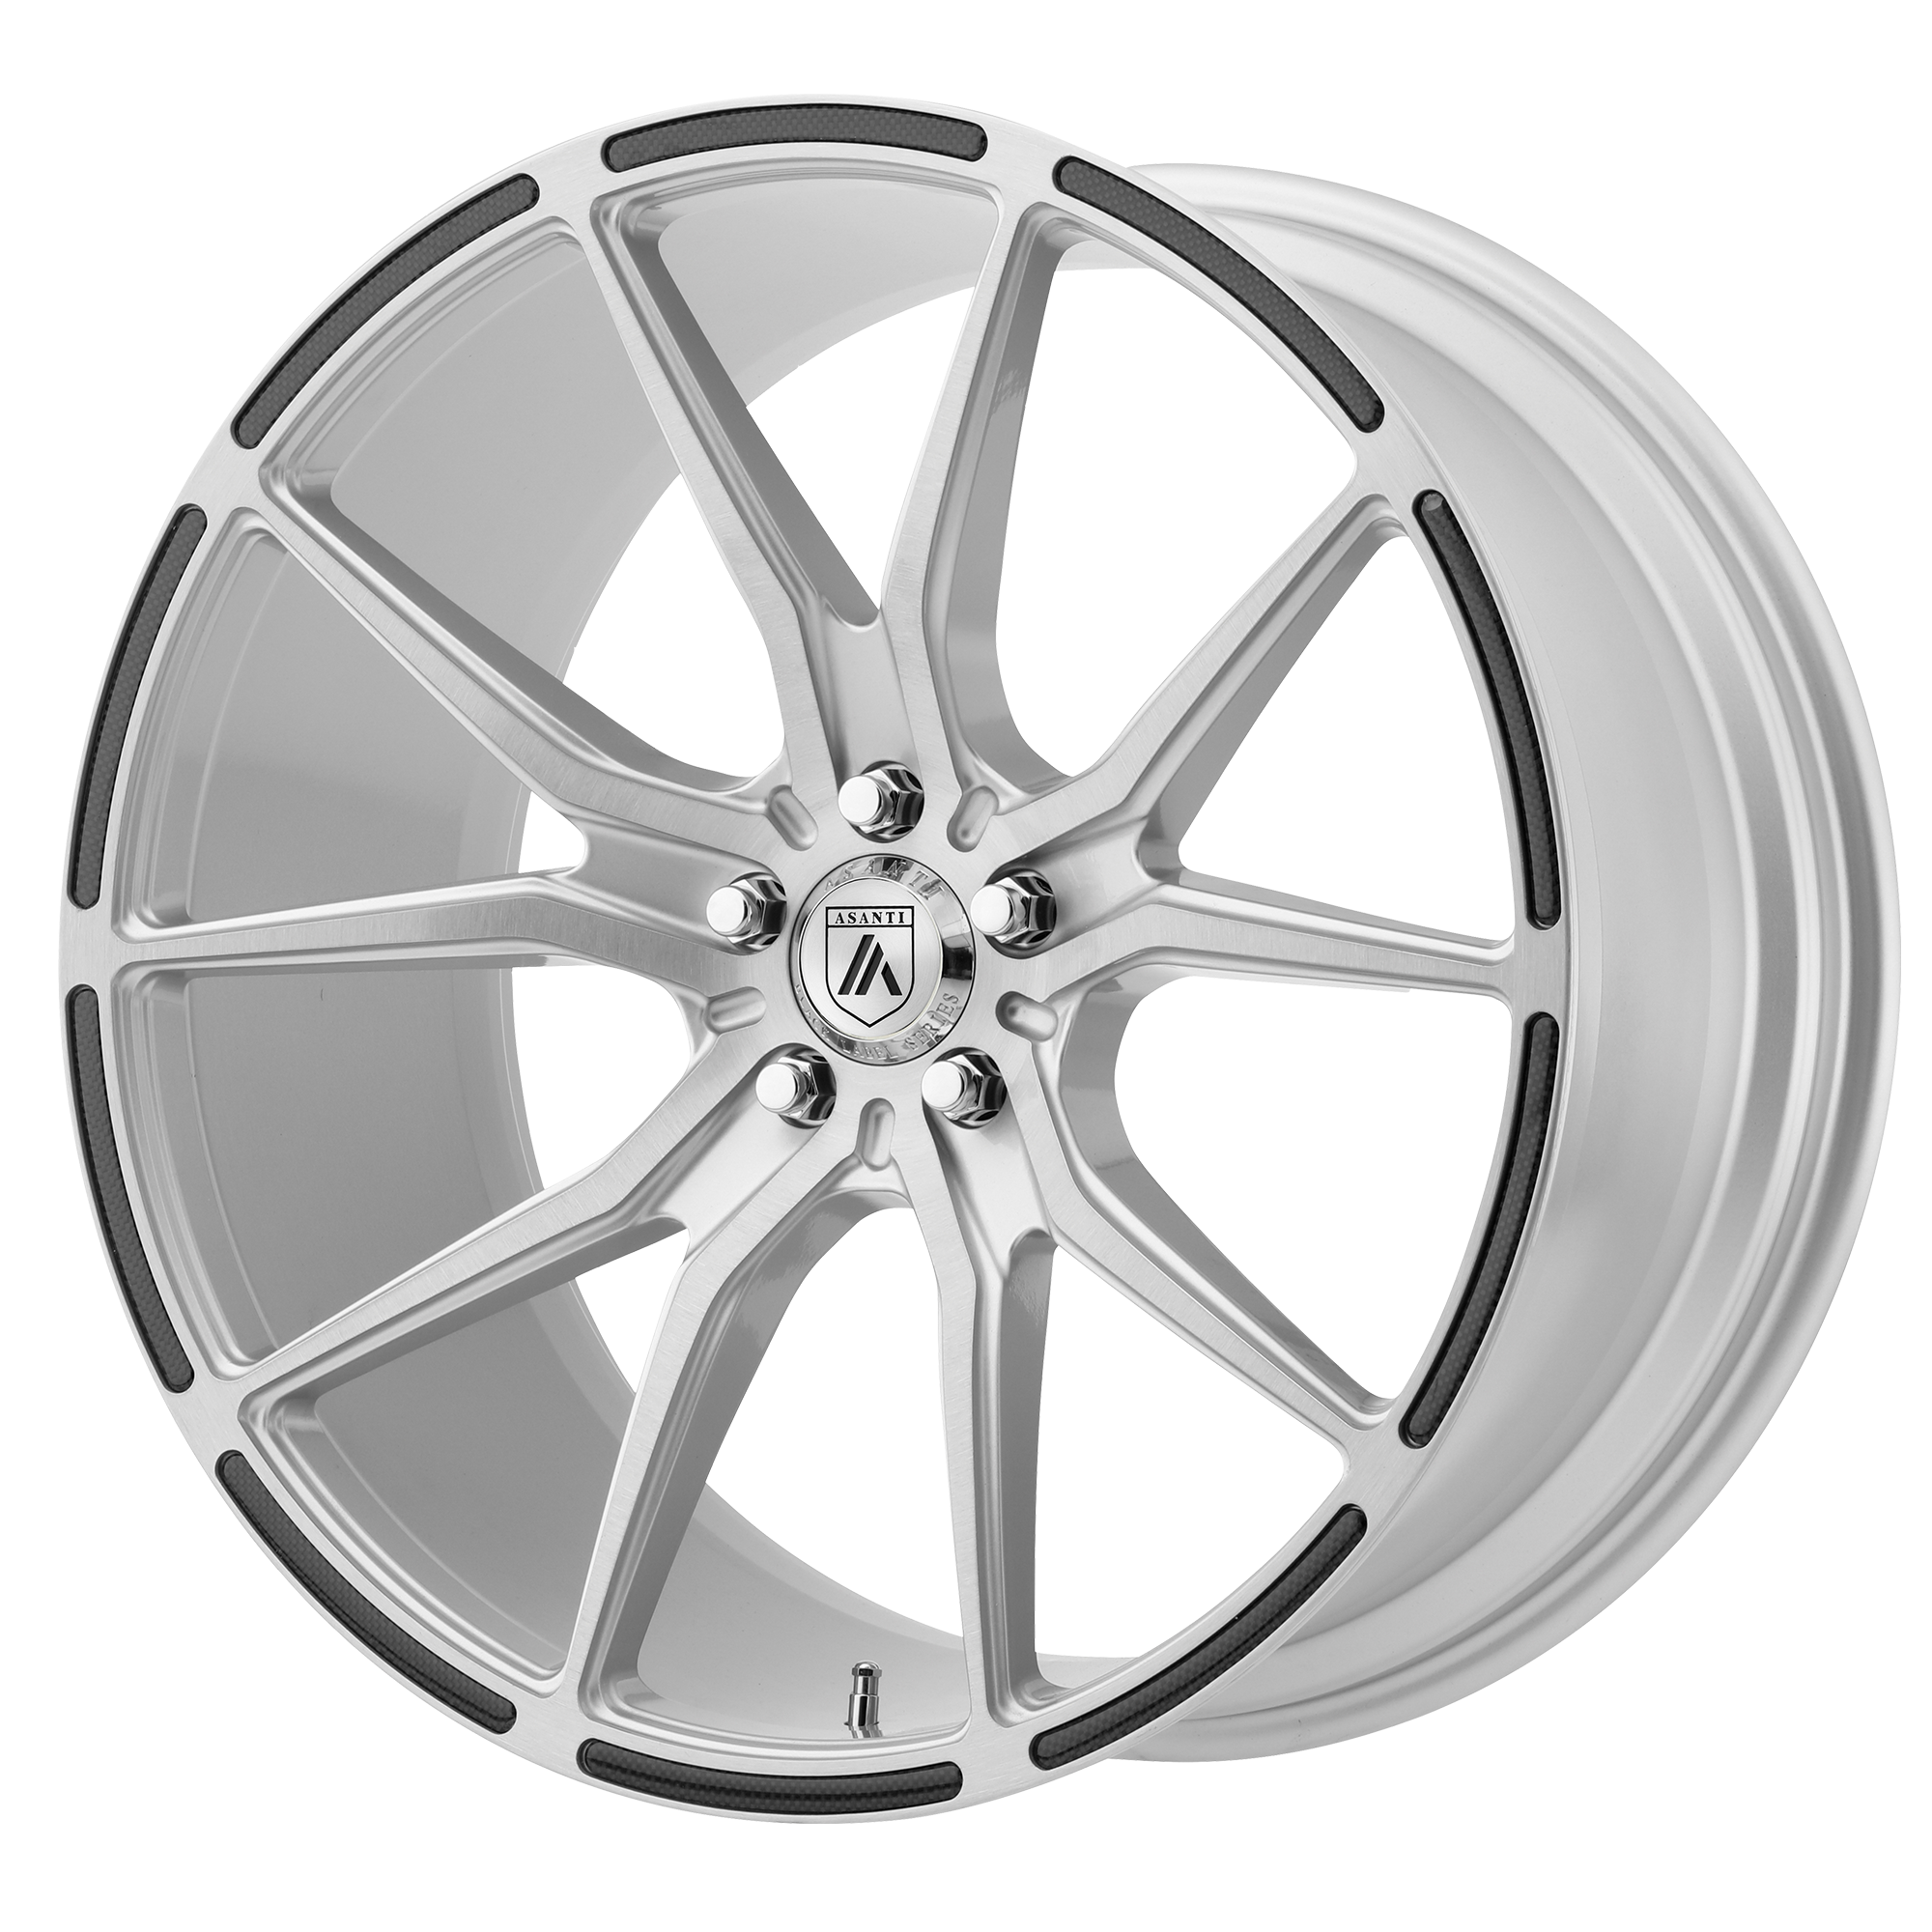 VEGA 20x9 5x120.00 BRUSHED SILVER W/ CARBON FIBER INSERTS (35 mm) - Tires and Engine Performance